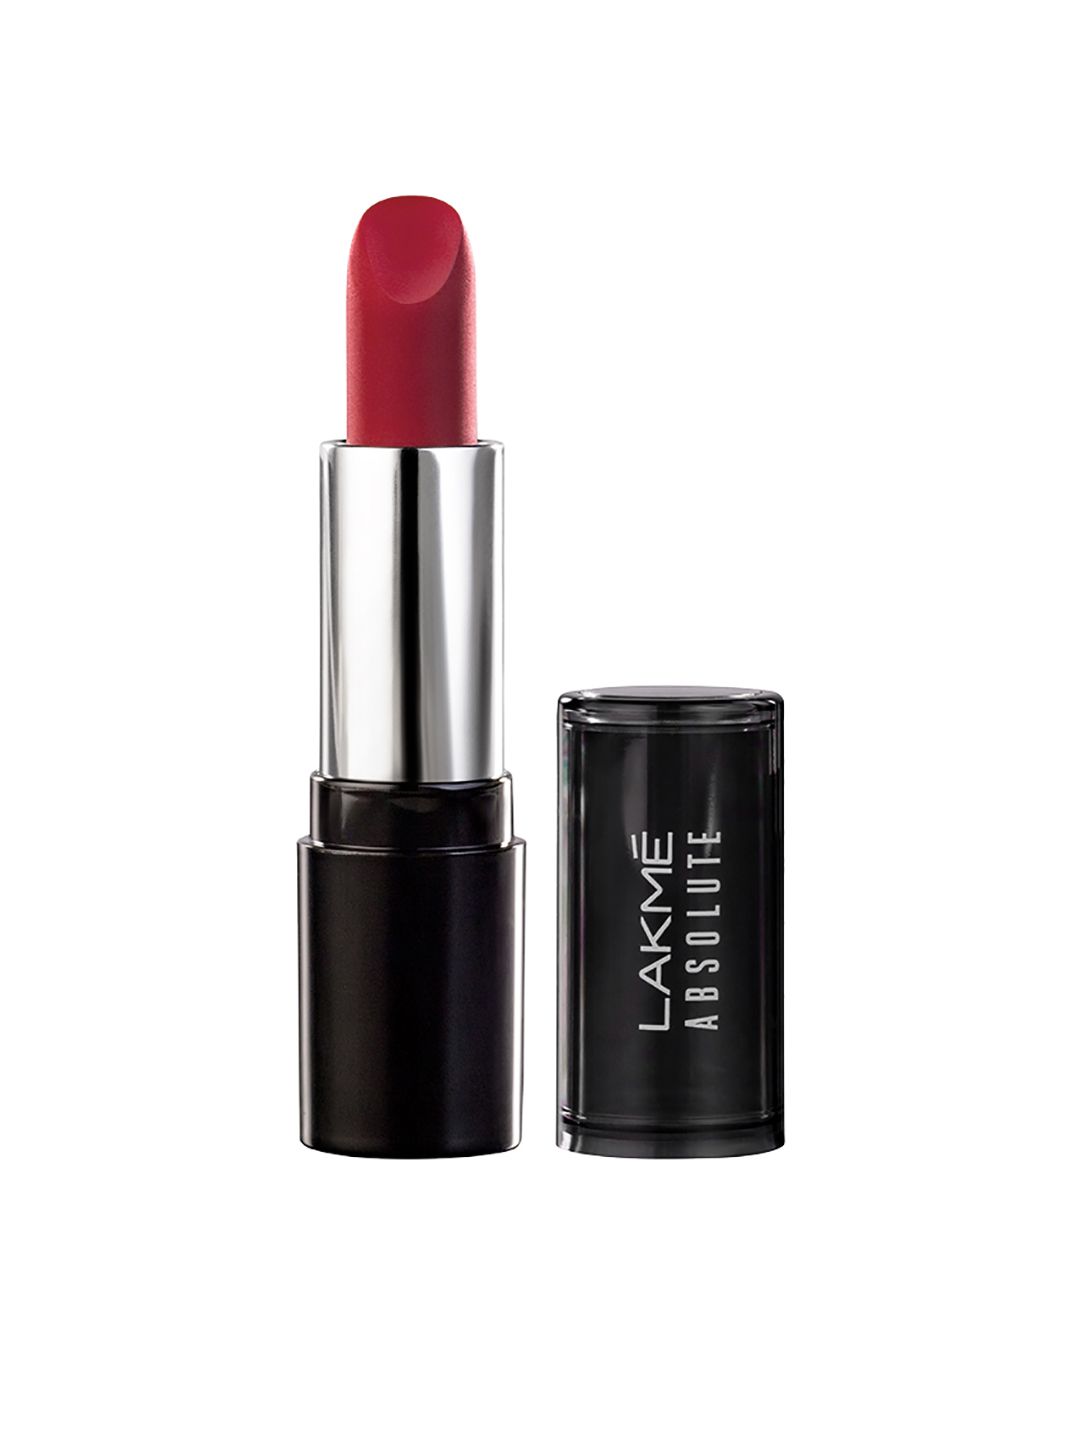 Lakme Absolute Matte Revolution Lip Color Bombshell Red 101 3.5 g Price in India